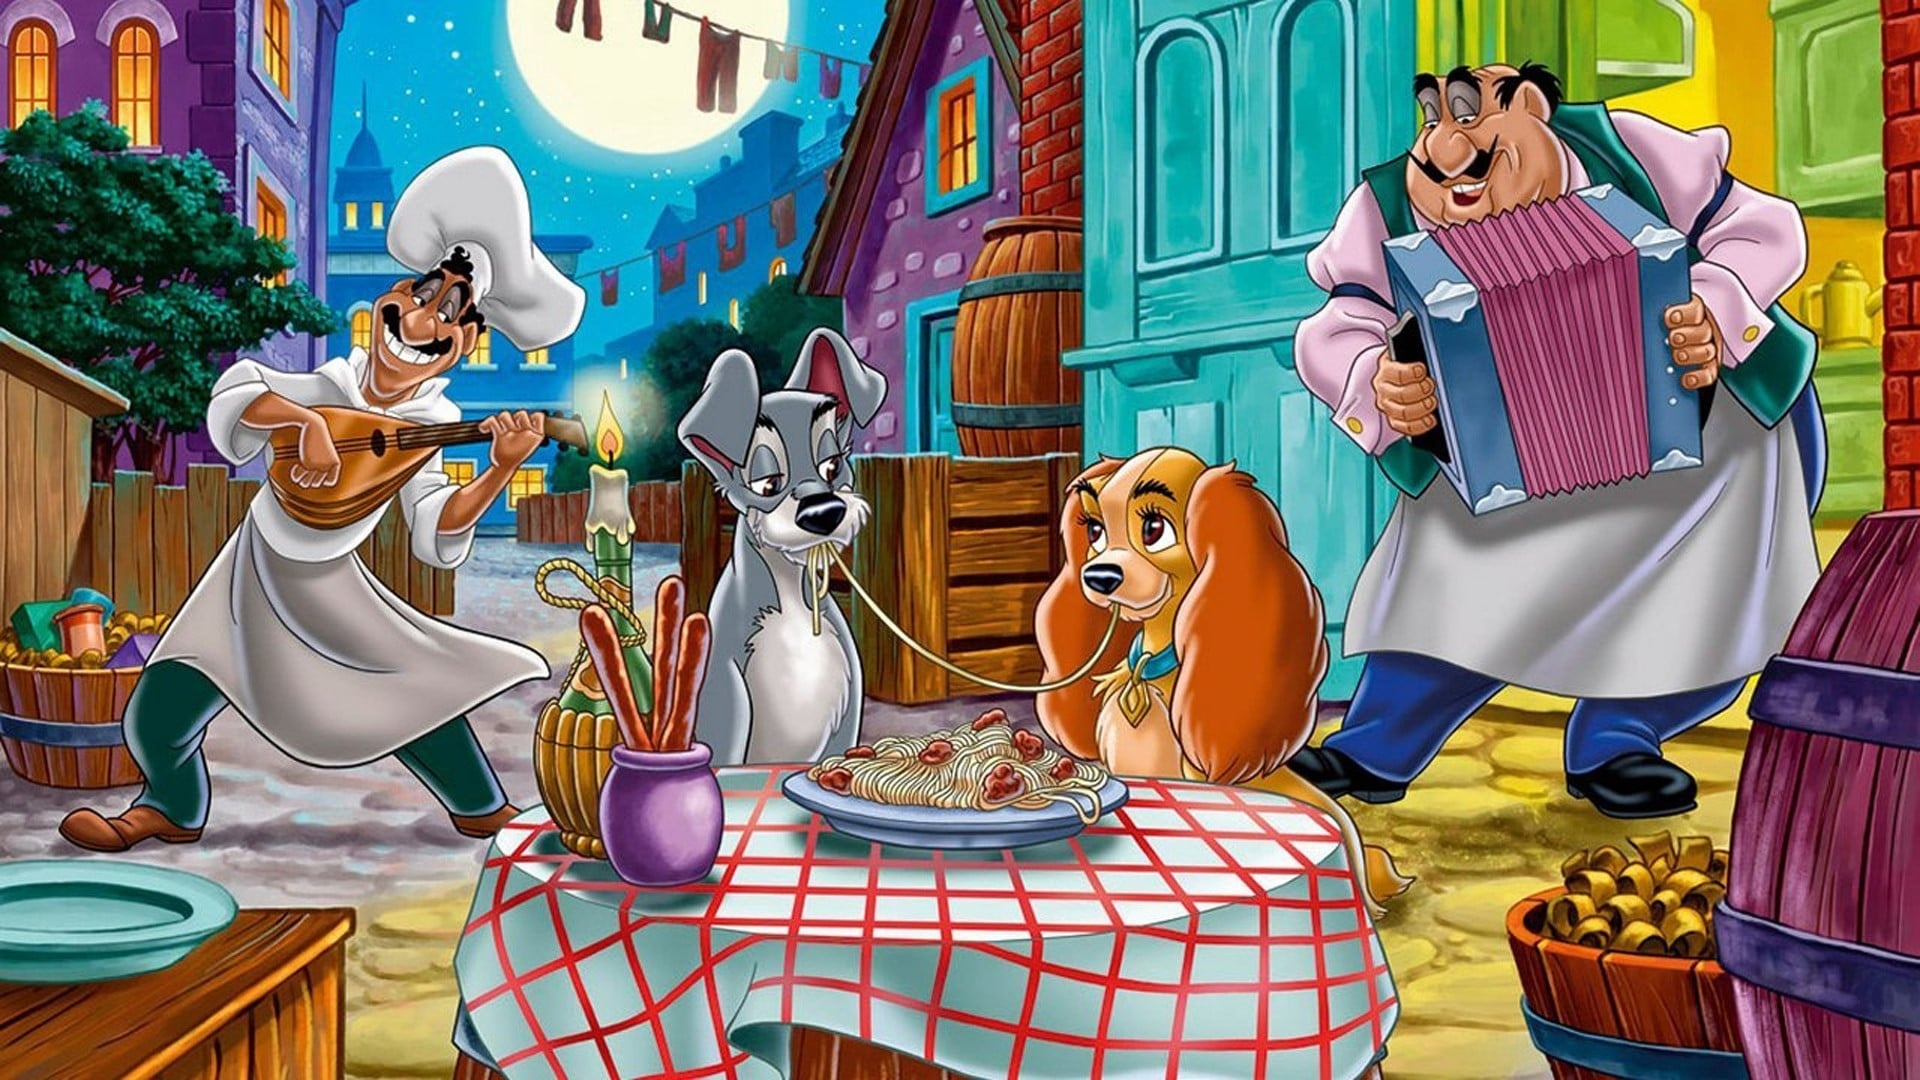 Lady and the Tramp, Vintage movie backdrops, Disney animation, Classic romance, 1920x1080 Full HD Desktop